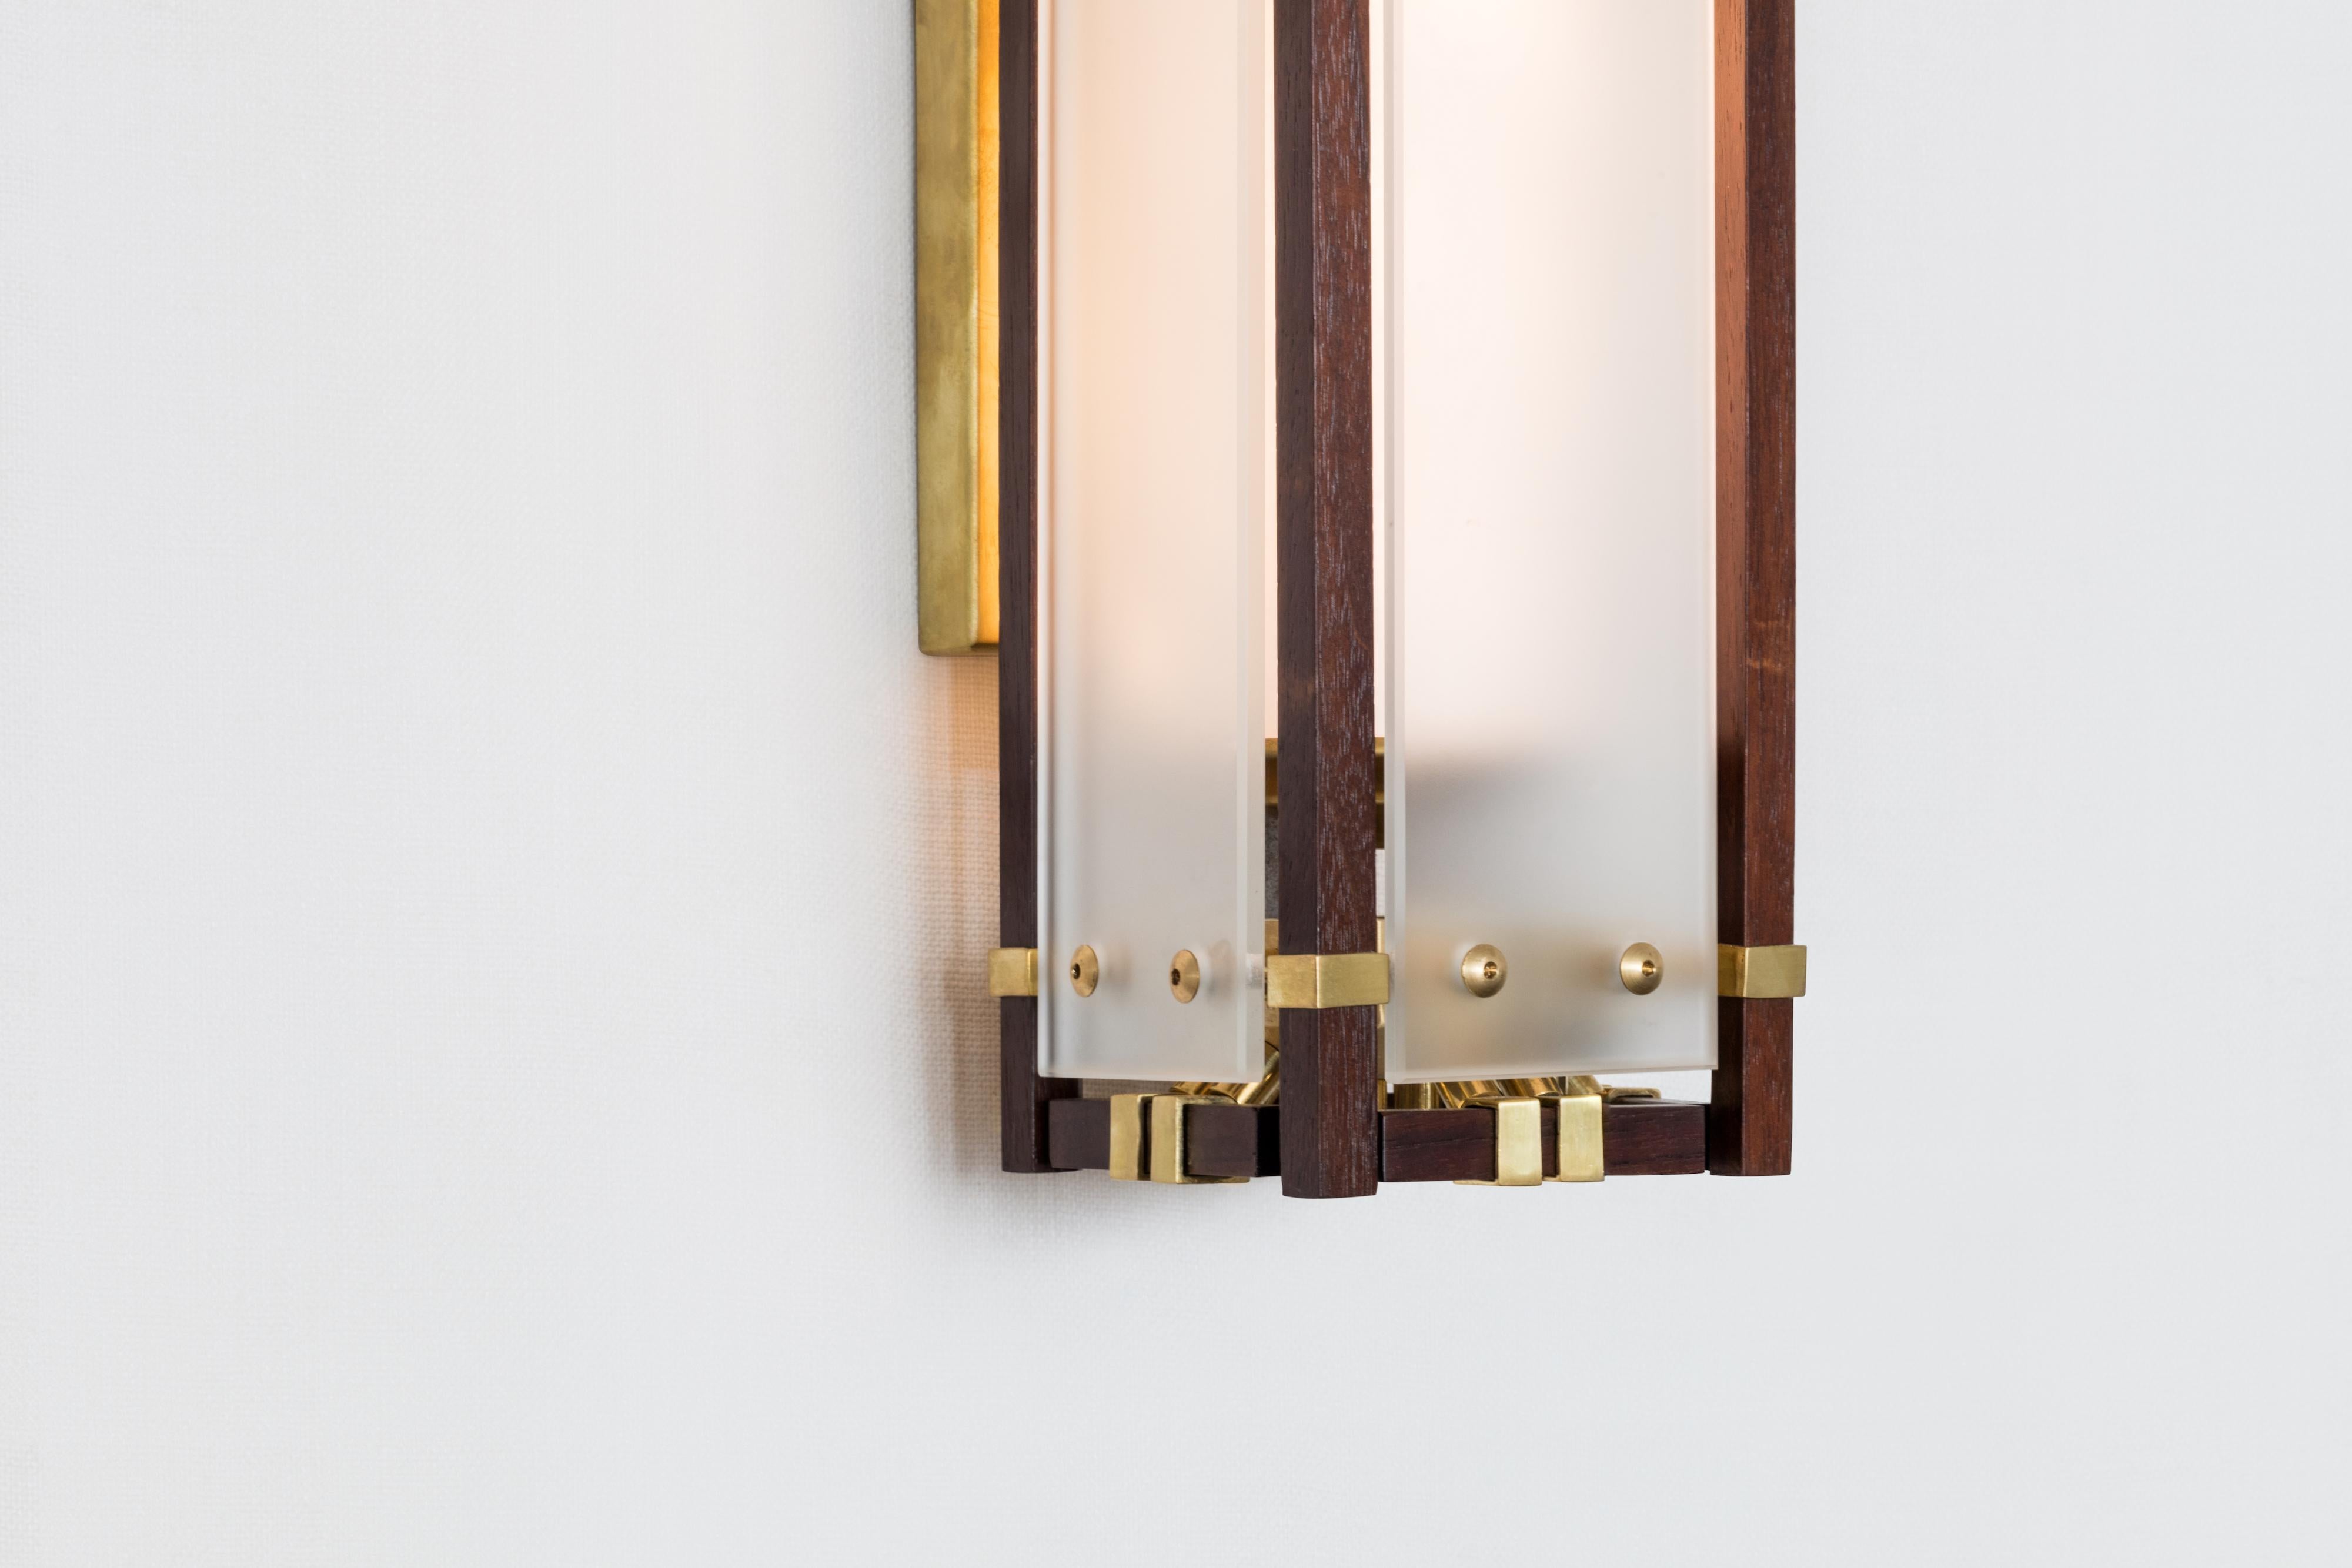 Measurements 4 W x 5 D x 18 H inches
Backplate: 4.35 W x 9 H inches.
Weight: 20 lbs

Materials
Metal: Brushed brass, blackened brass, bronze, brushed nickel
Frame: Blackened oak, bleached oak, walnut, white lacquer, aluminum
Glass: